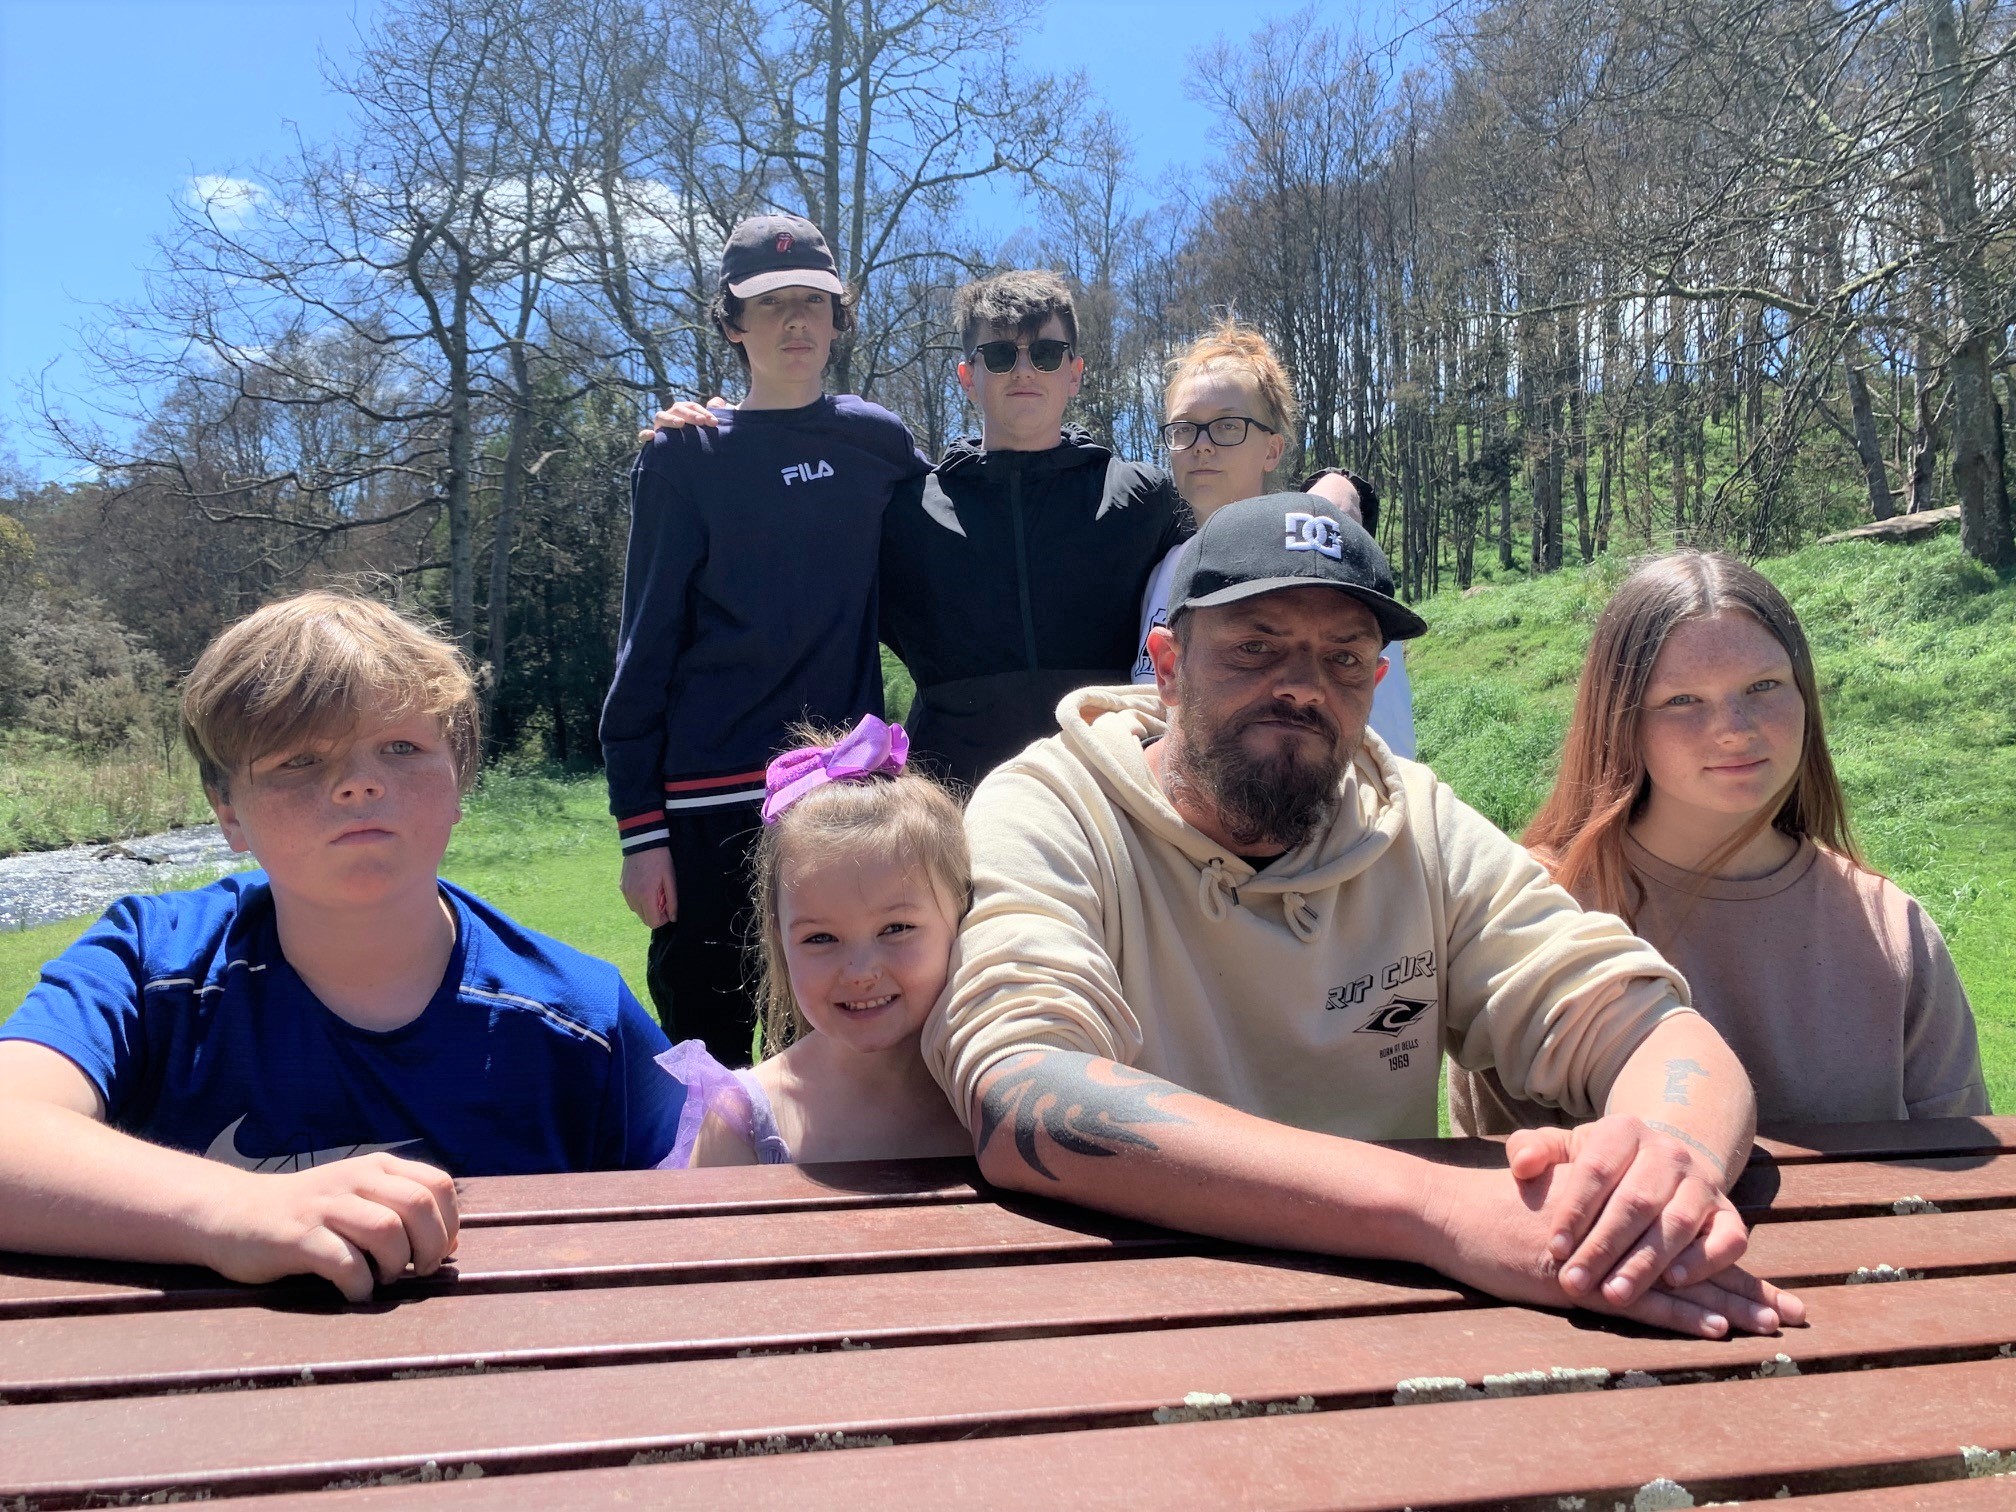 A man sits at a picnic table with a number of children.